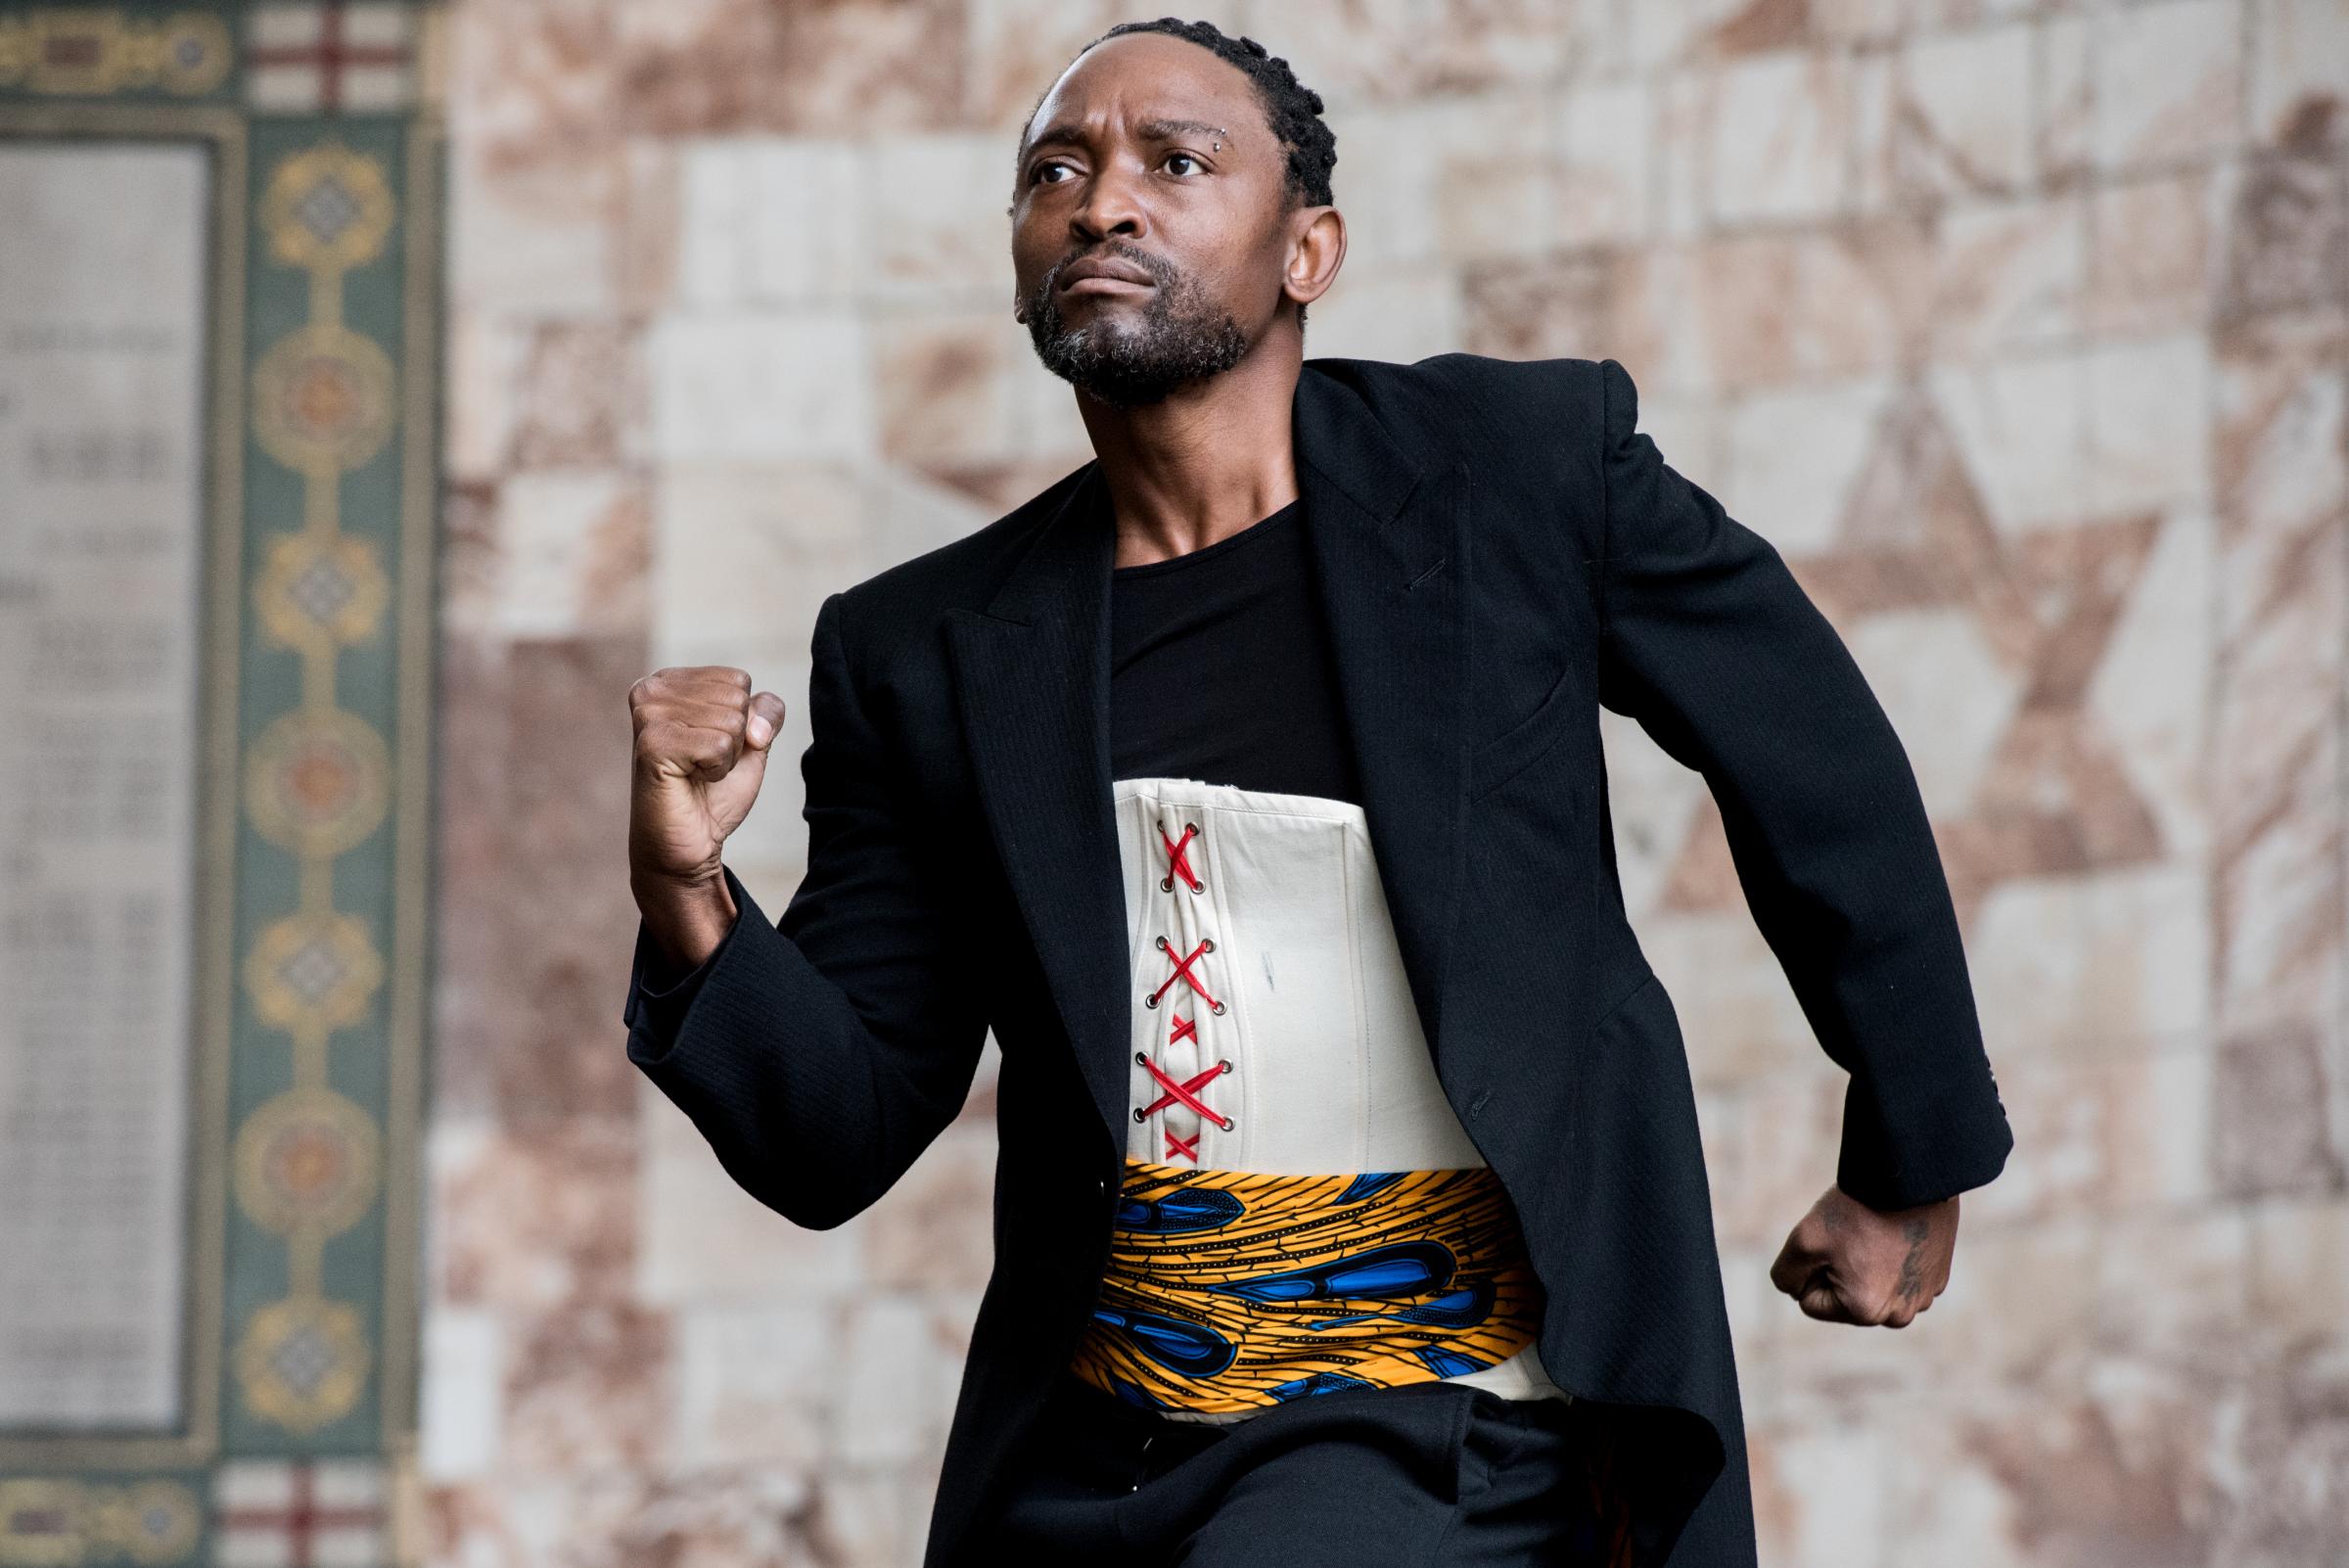 Wiltshire Creative Cty Encounters:Black Victorians by Jeanefer Jean-Charles, performed 30th August 2020 at St George’s Garrison Church. Dancer Bafana Solomon Matea Phot credit: festival.org Greenwell